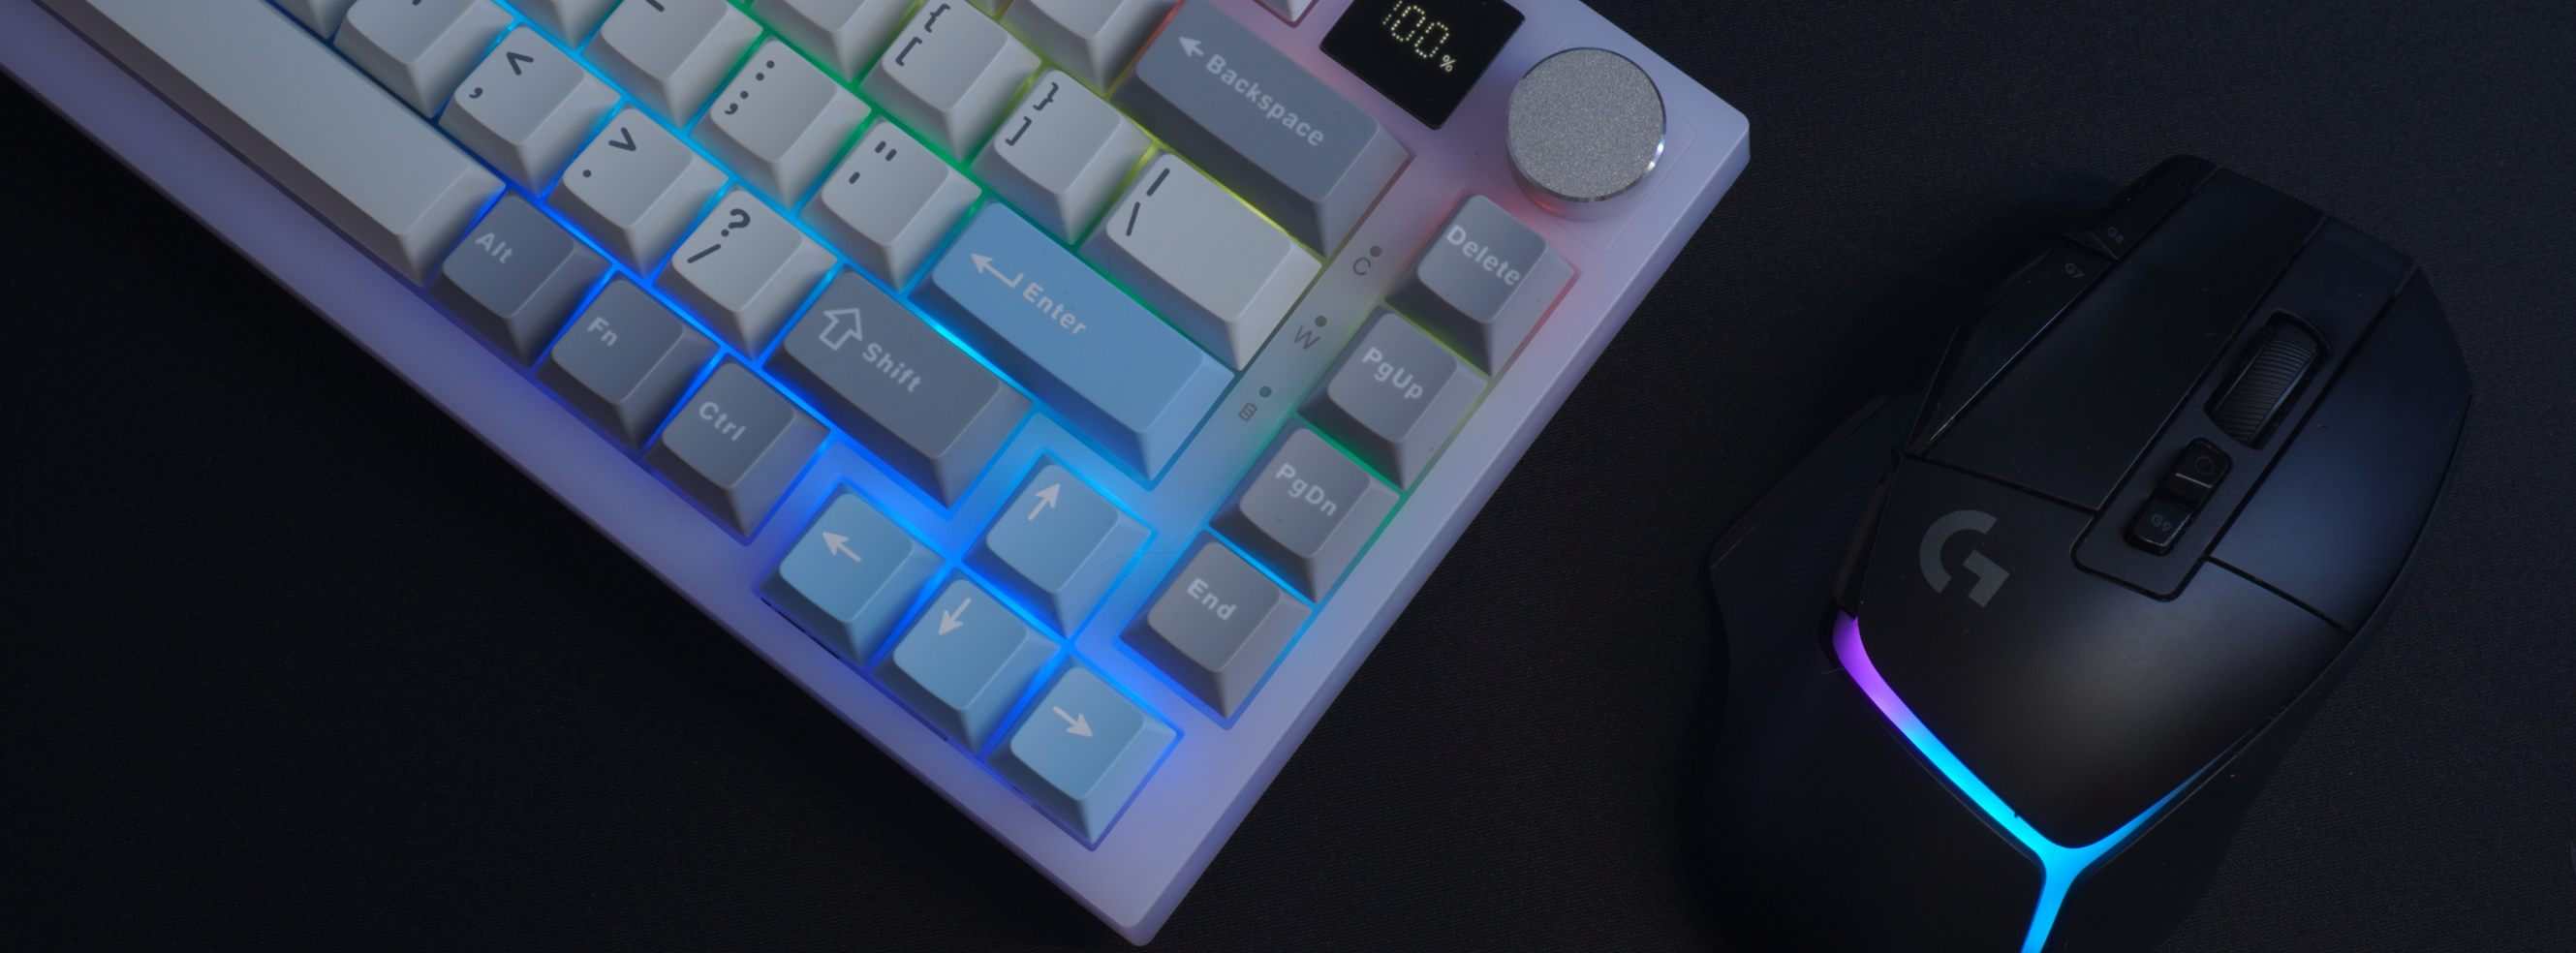 This is a detail photo of our What The Thock Bubbly75 75% Mechanical Keyboard in the transparent color on a desk with a Black desk mat and gaming mouse, taken from above on a 45degree angle